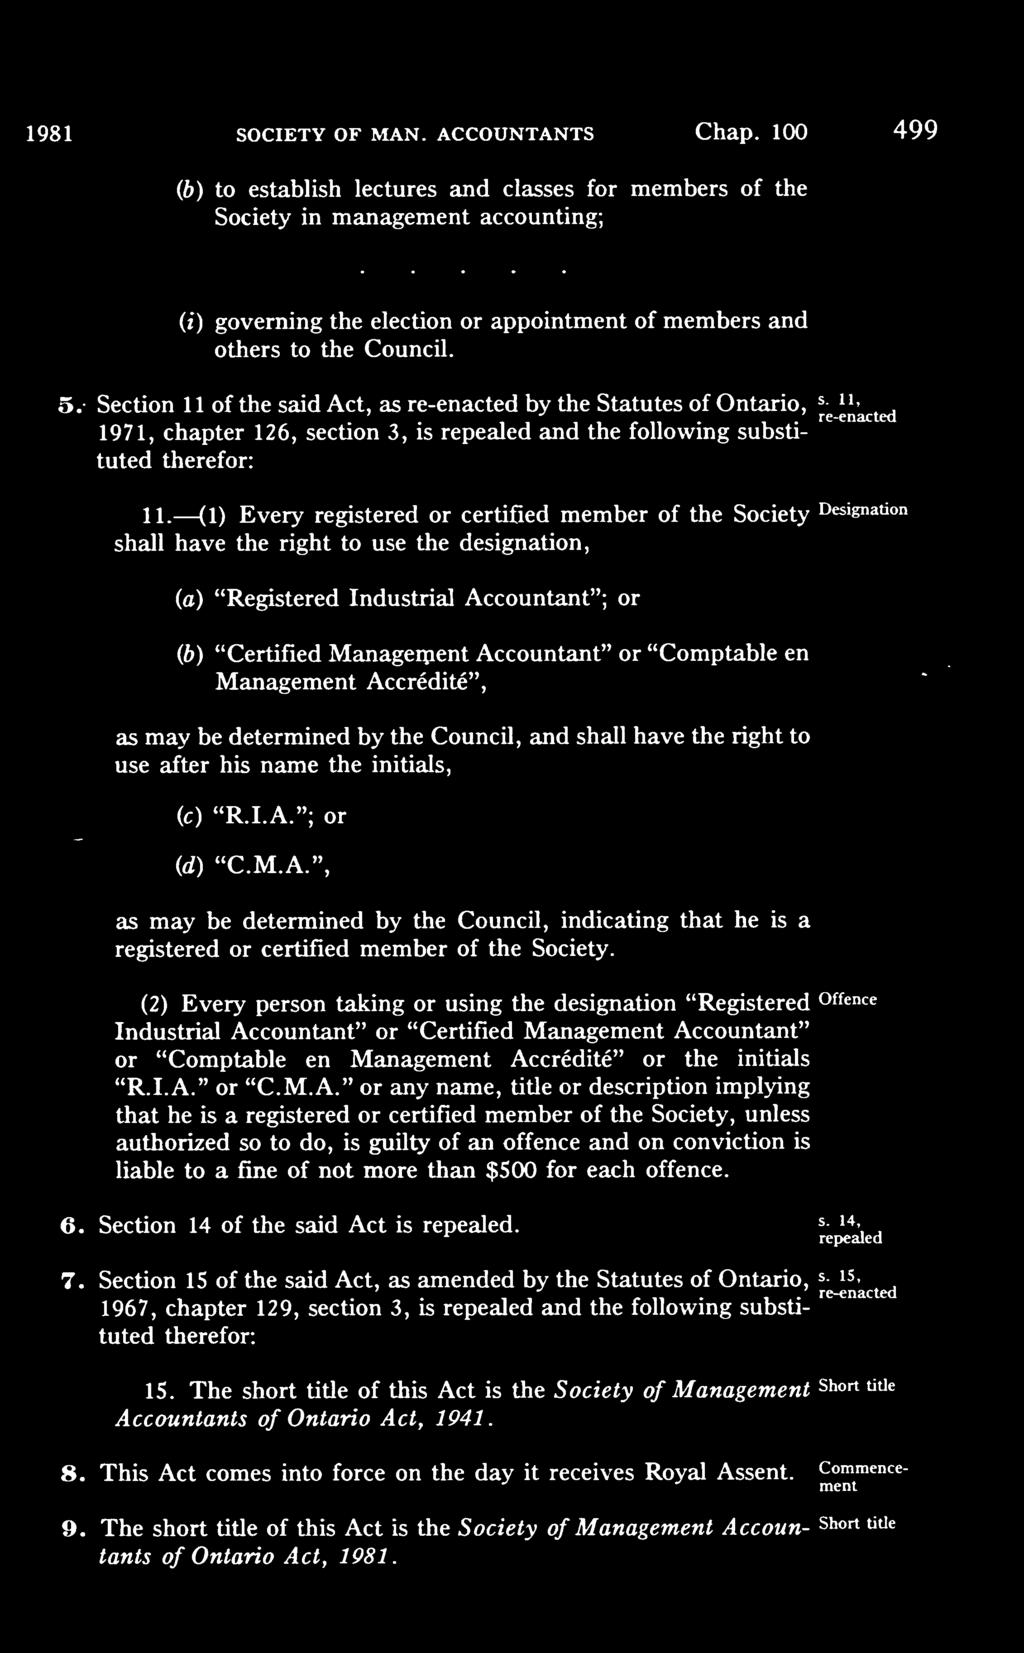 Section 1 1 of the said Act, as by the Statutes of Ontario, l-^ H 1971, chapter 126, section 3, is repealed and the following substituted 11.